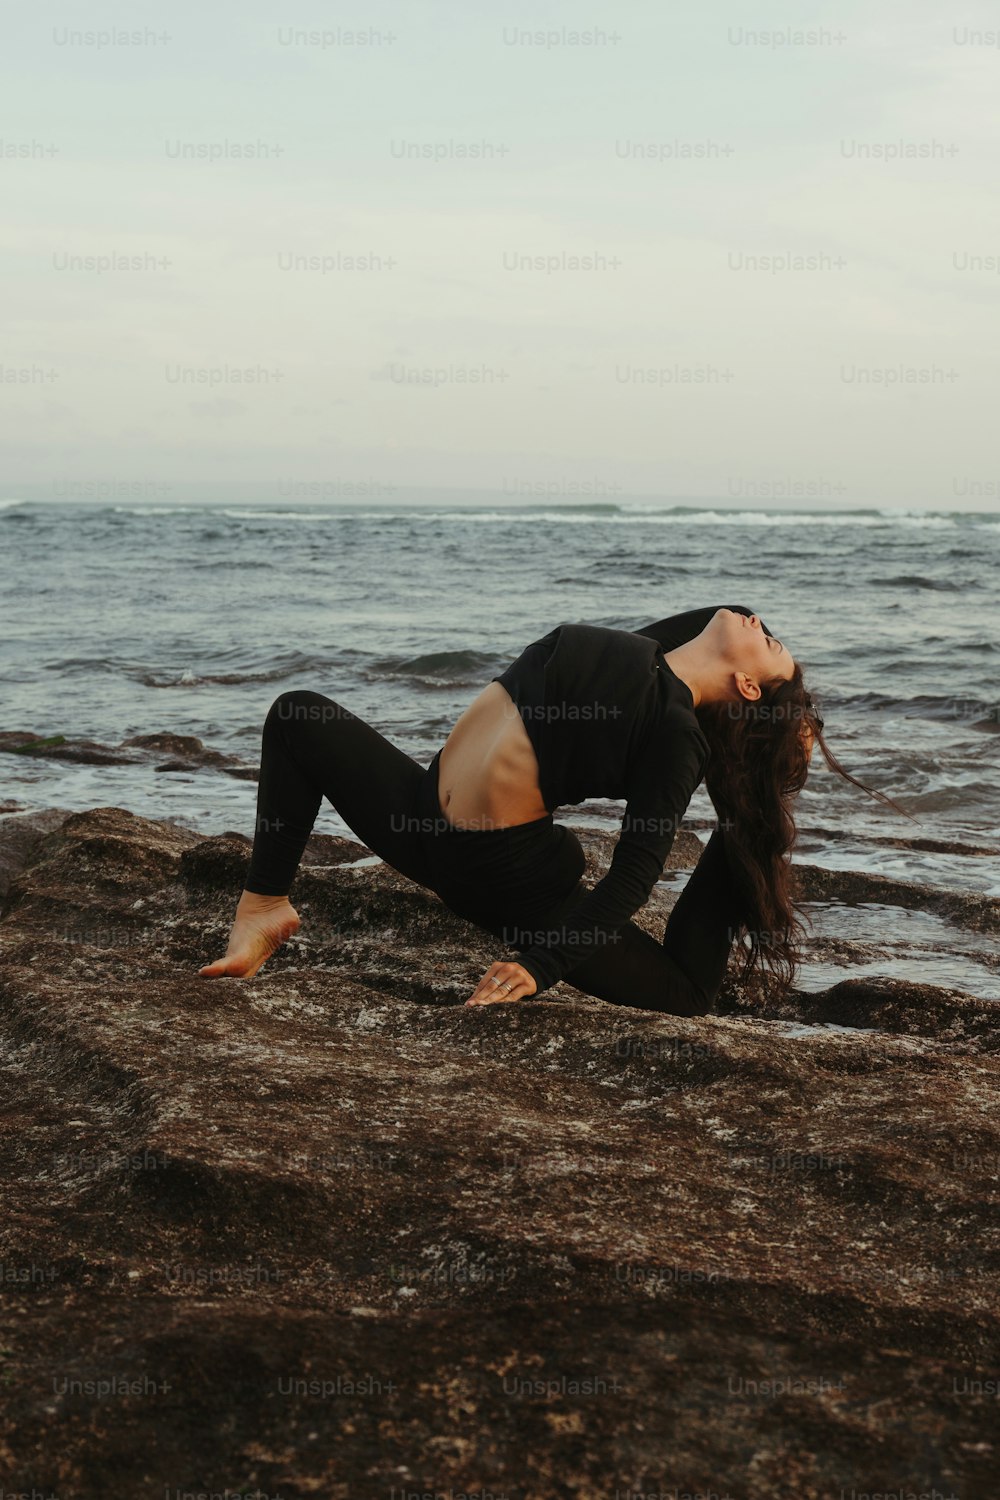 a woman in a black top and leggings on a rocky beach